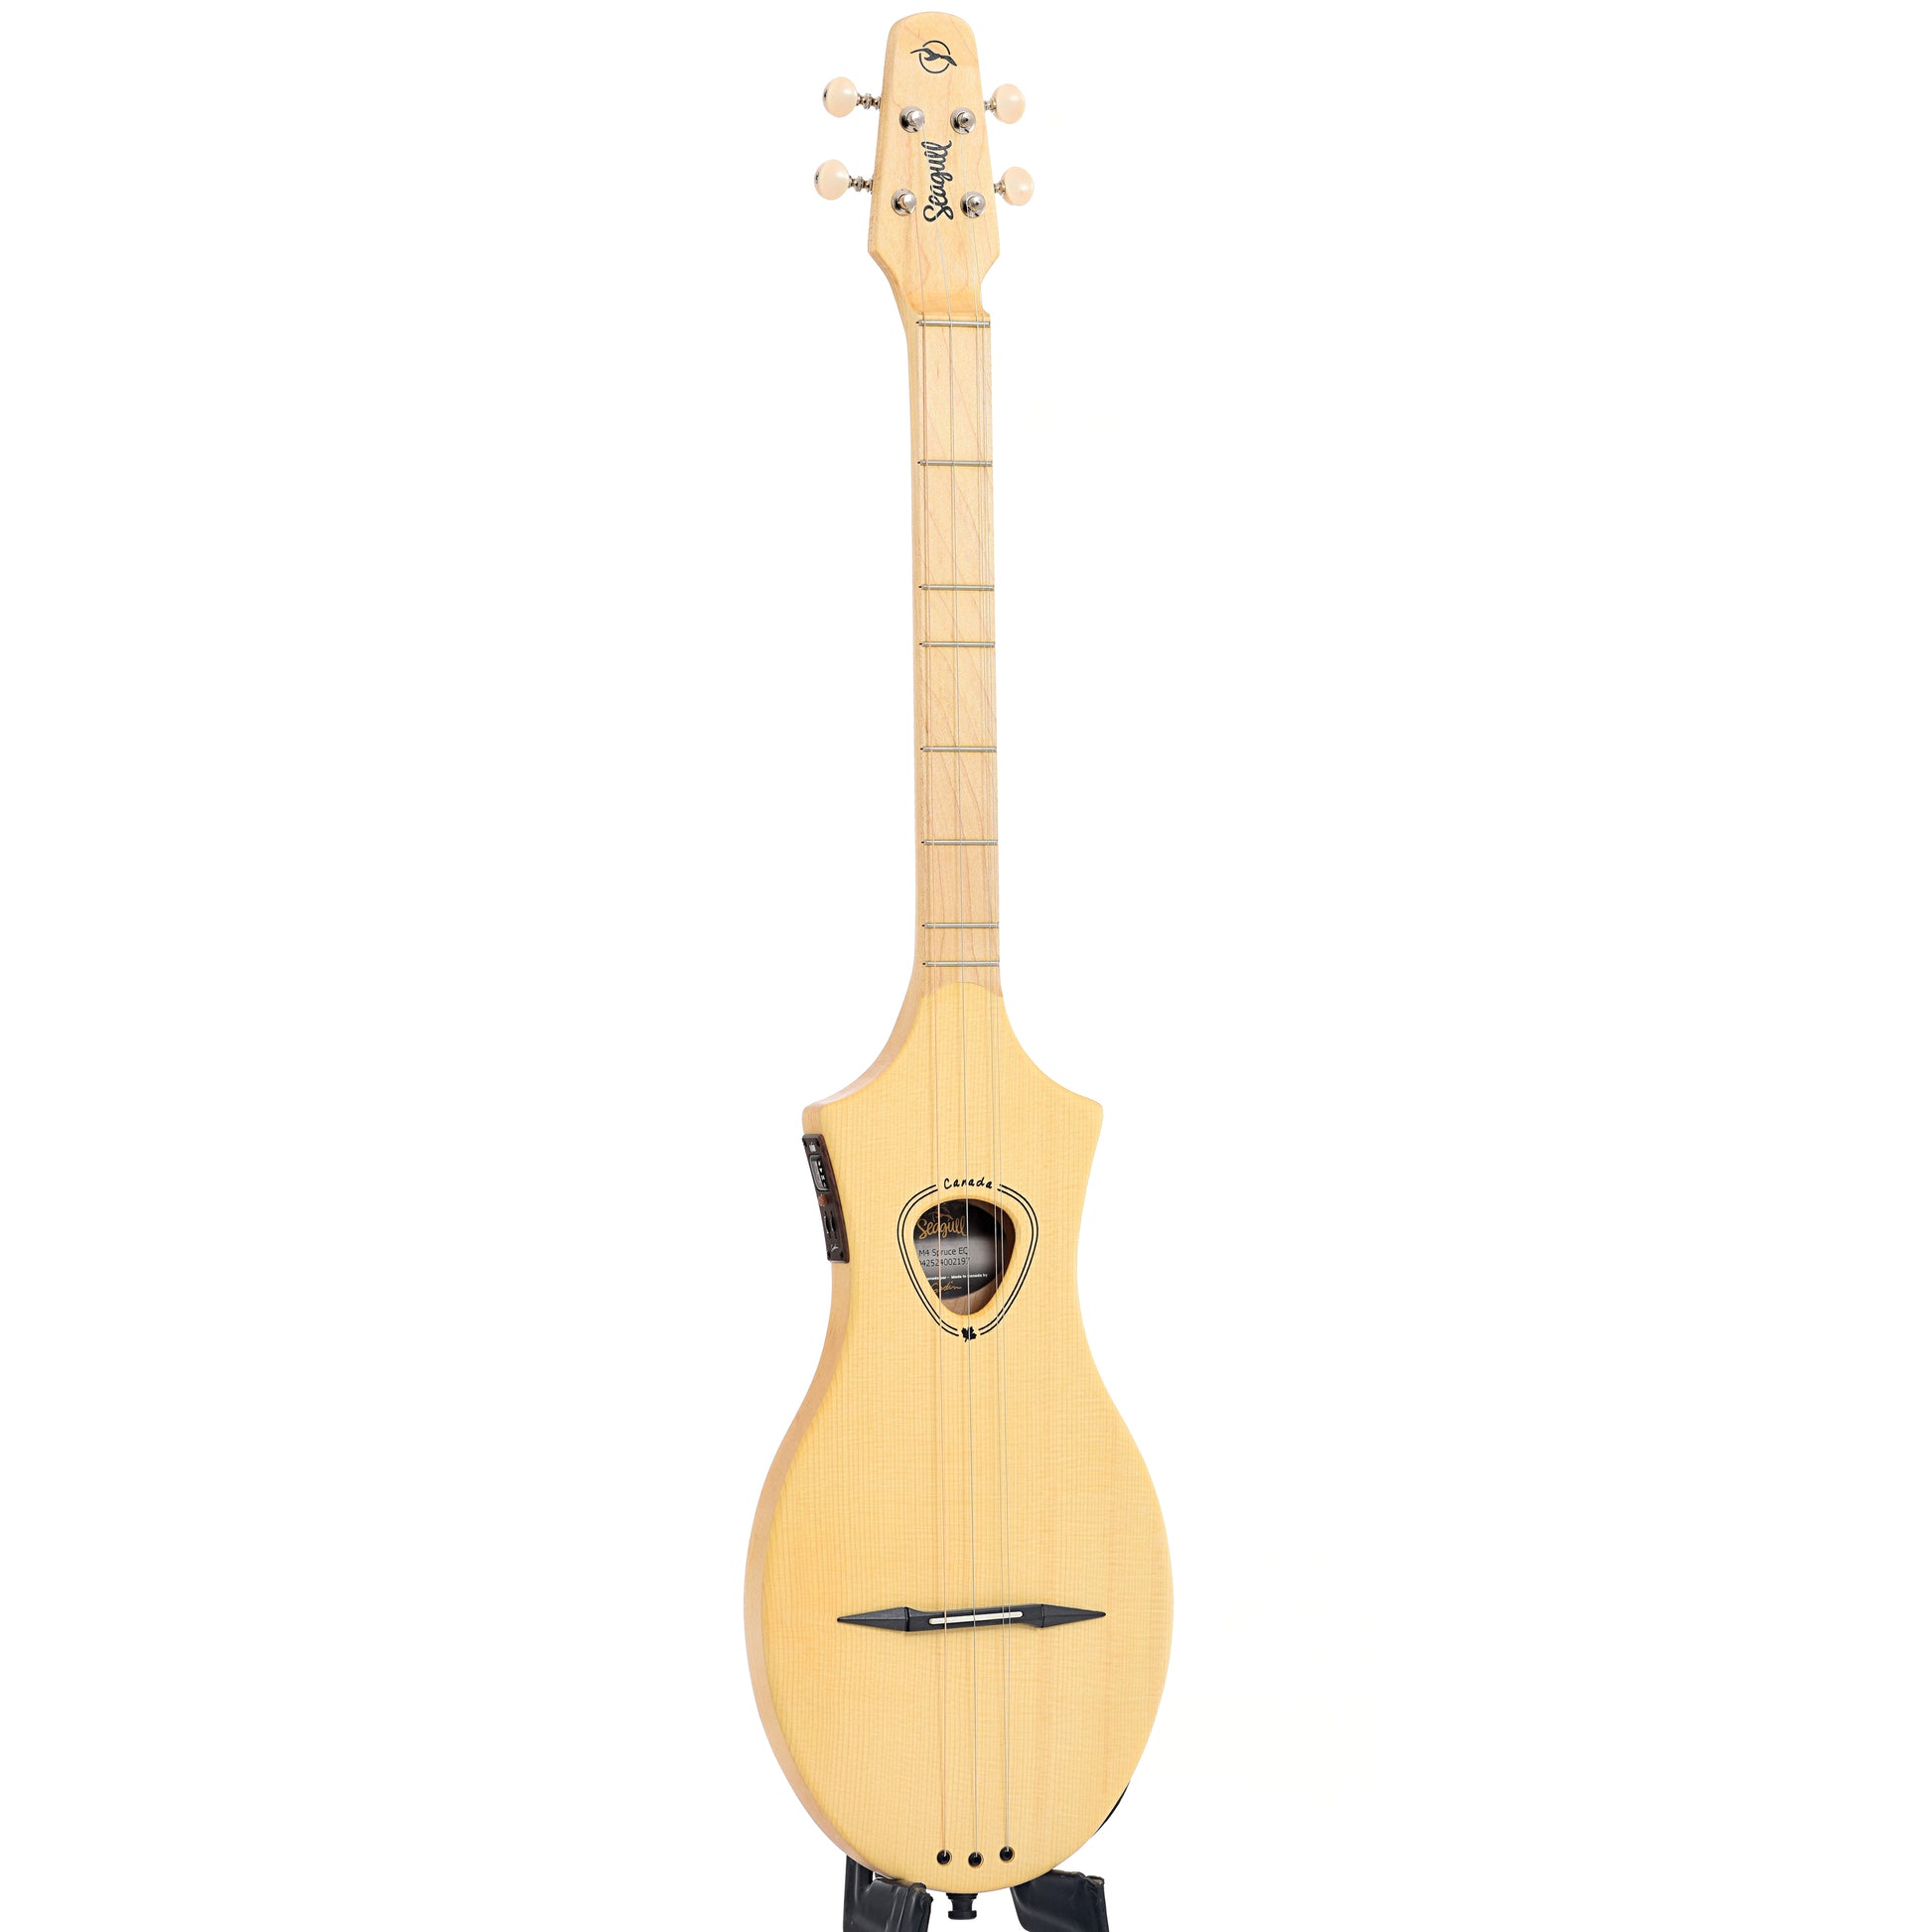 Full front and side of Seagull M4 "Merlin" 4-String Diatonic Acoustic Instrument with Pickup